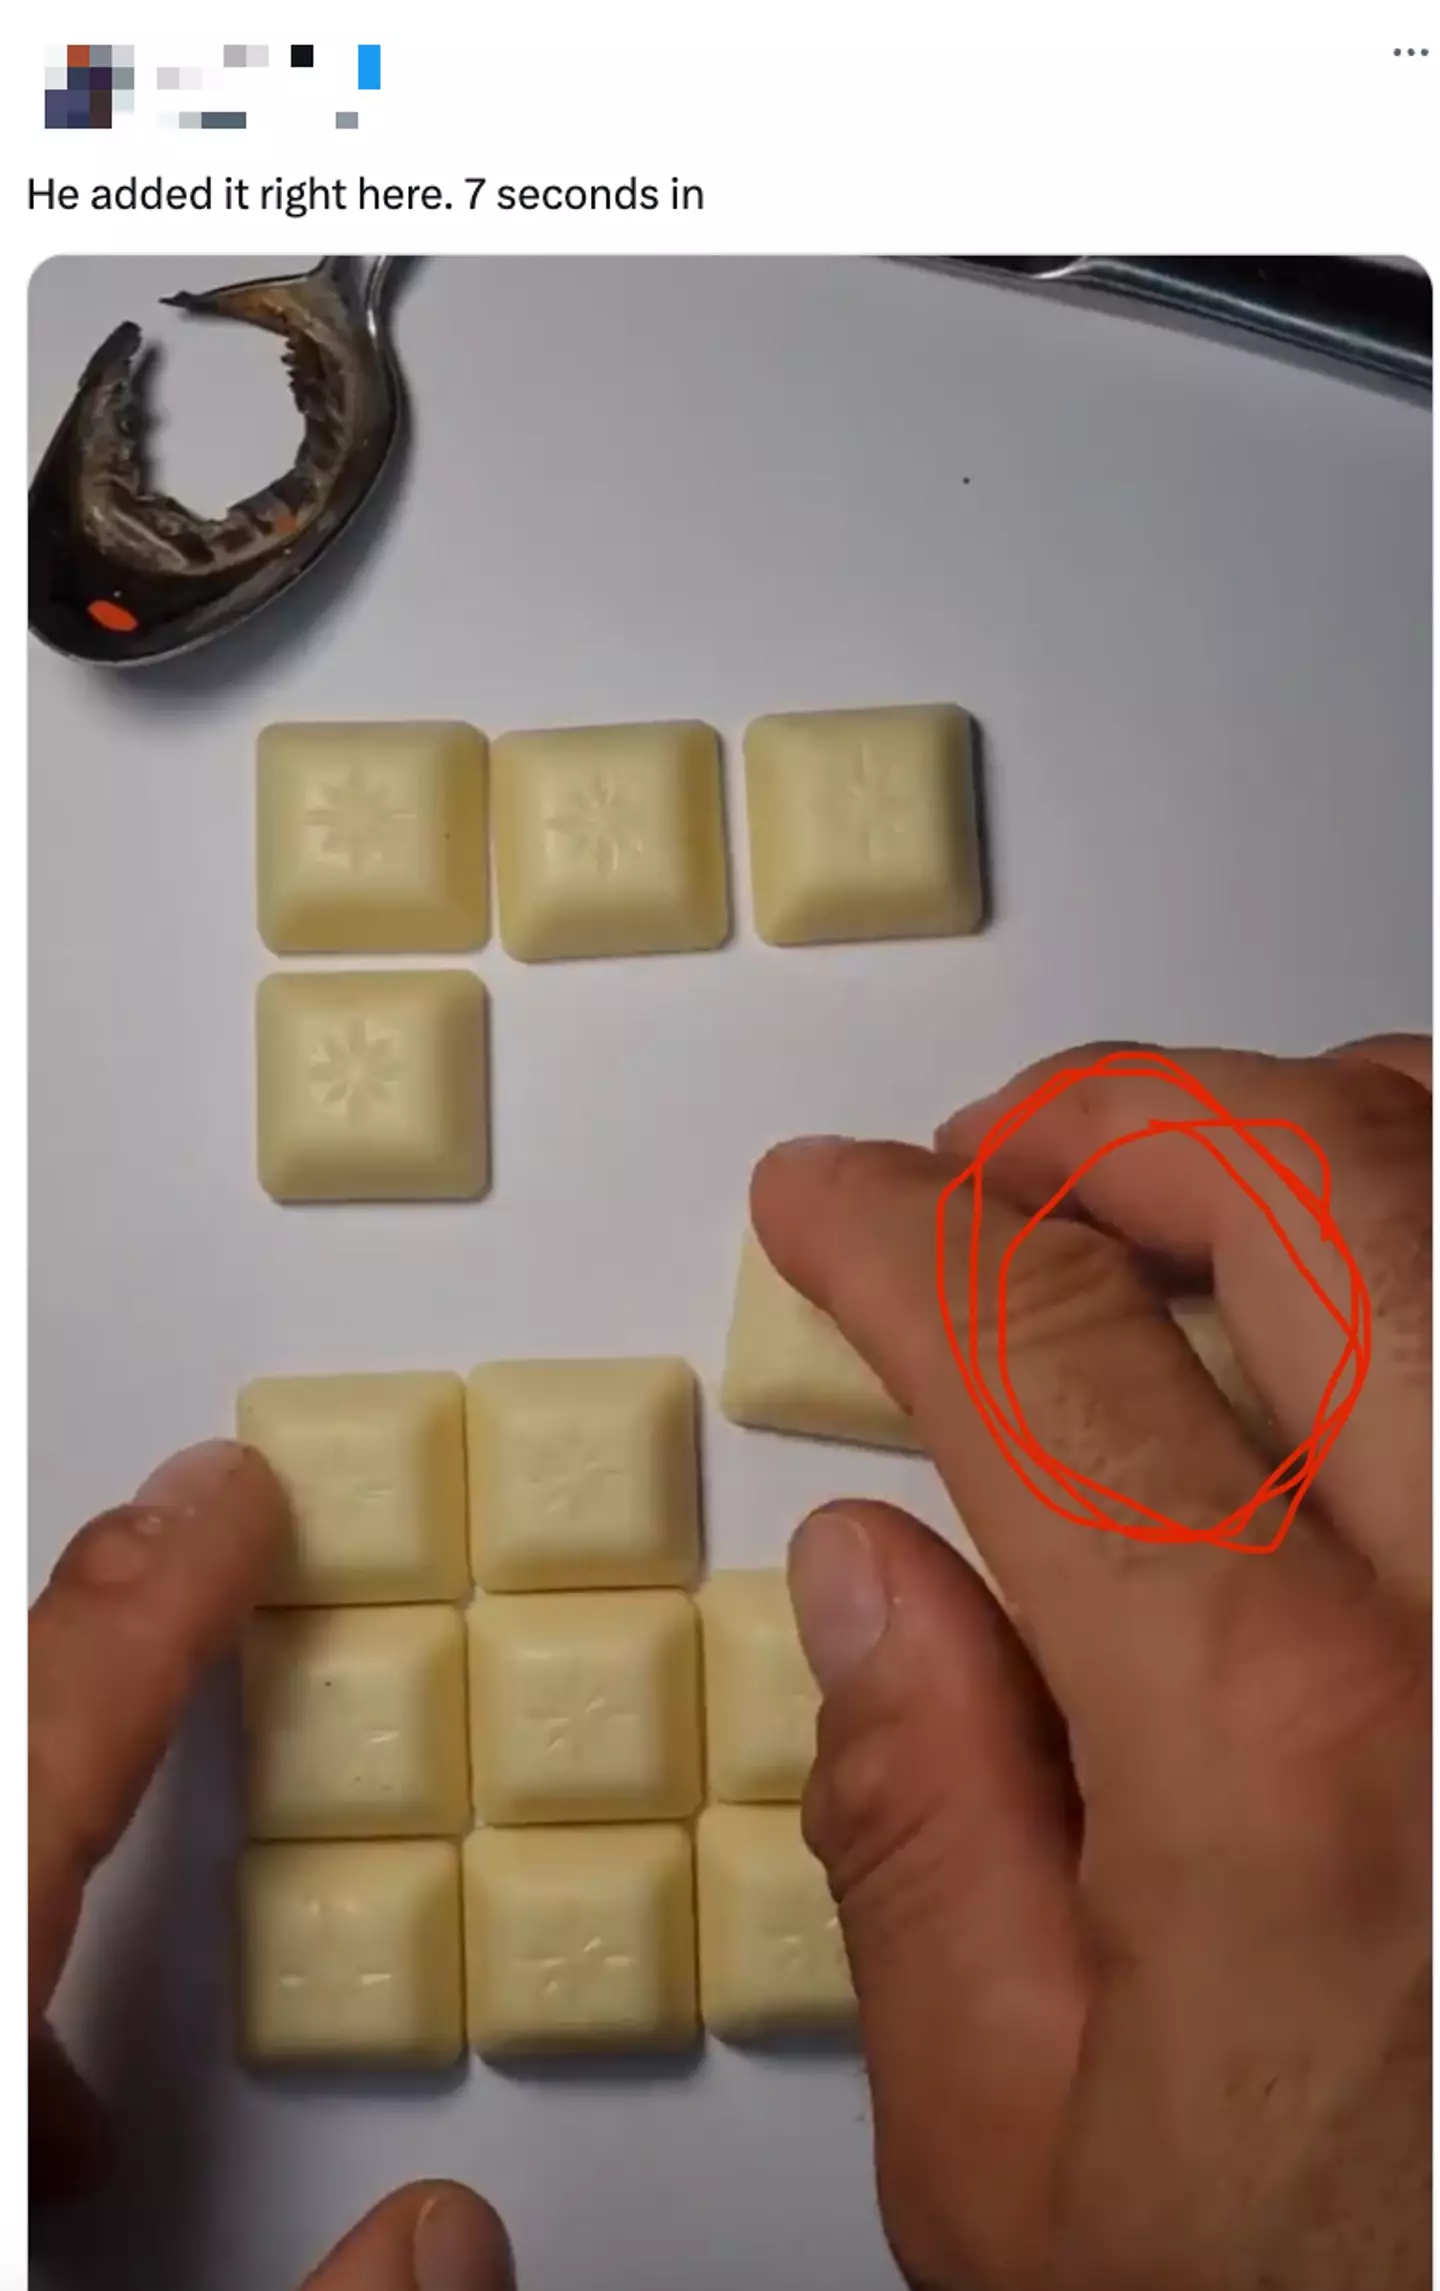 Eagle-eyed social media users thought they spotted the moment the extra piece was added.